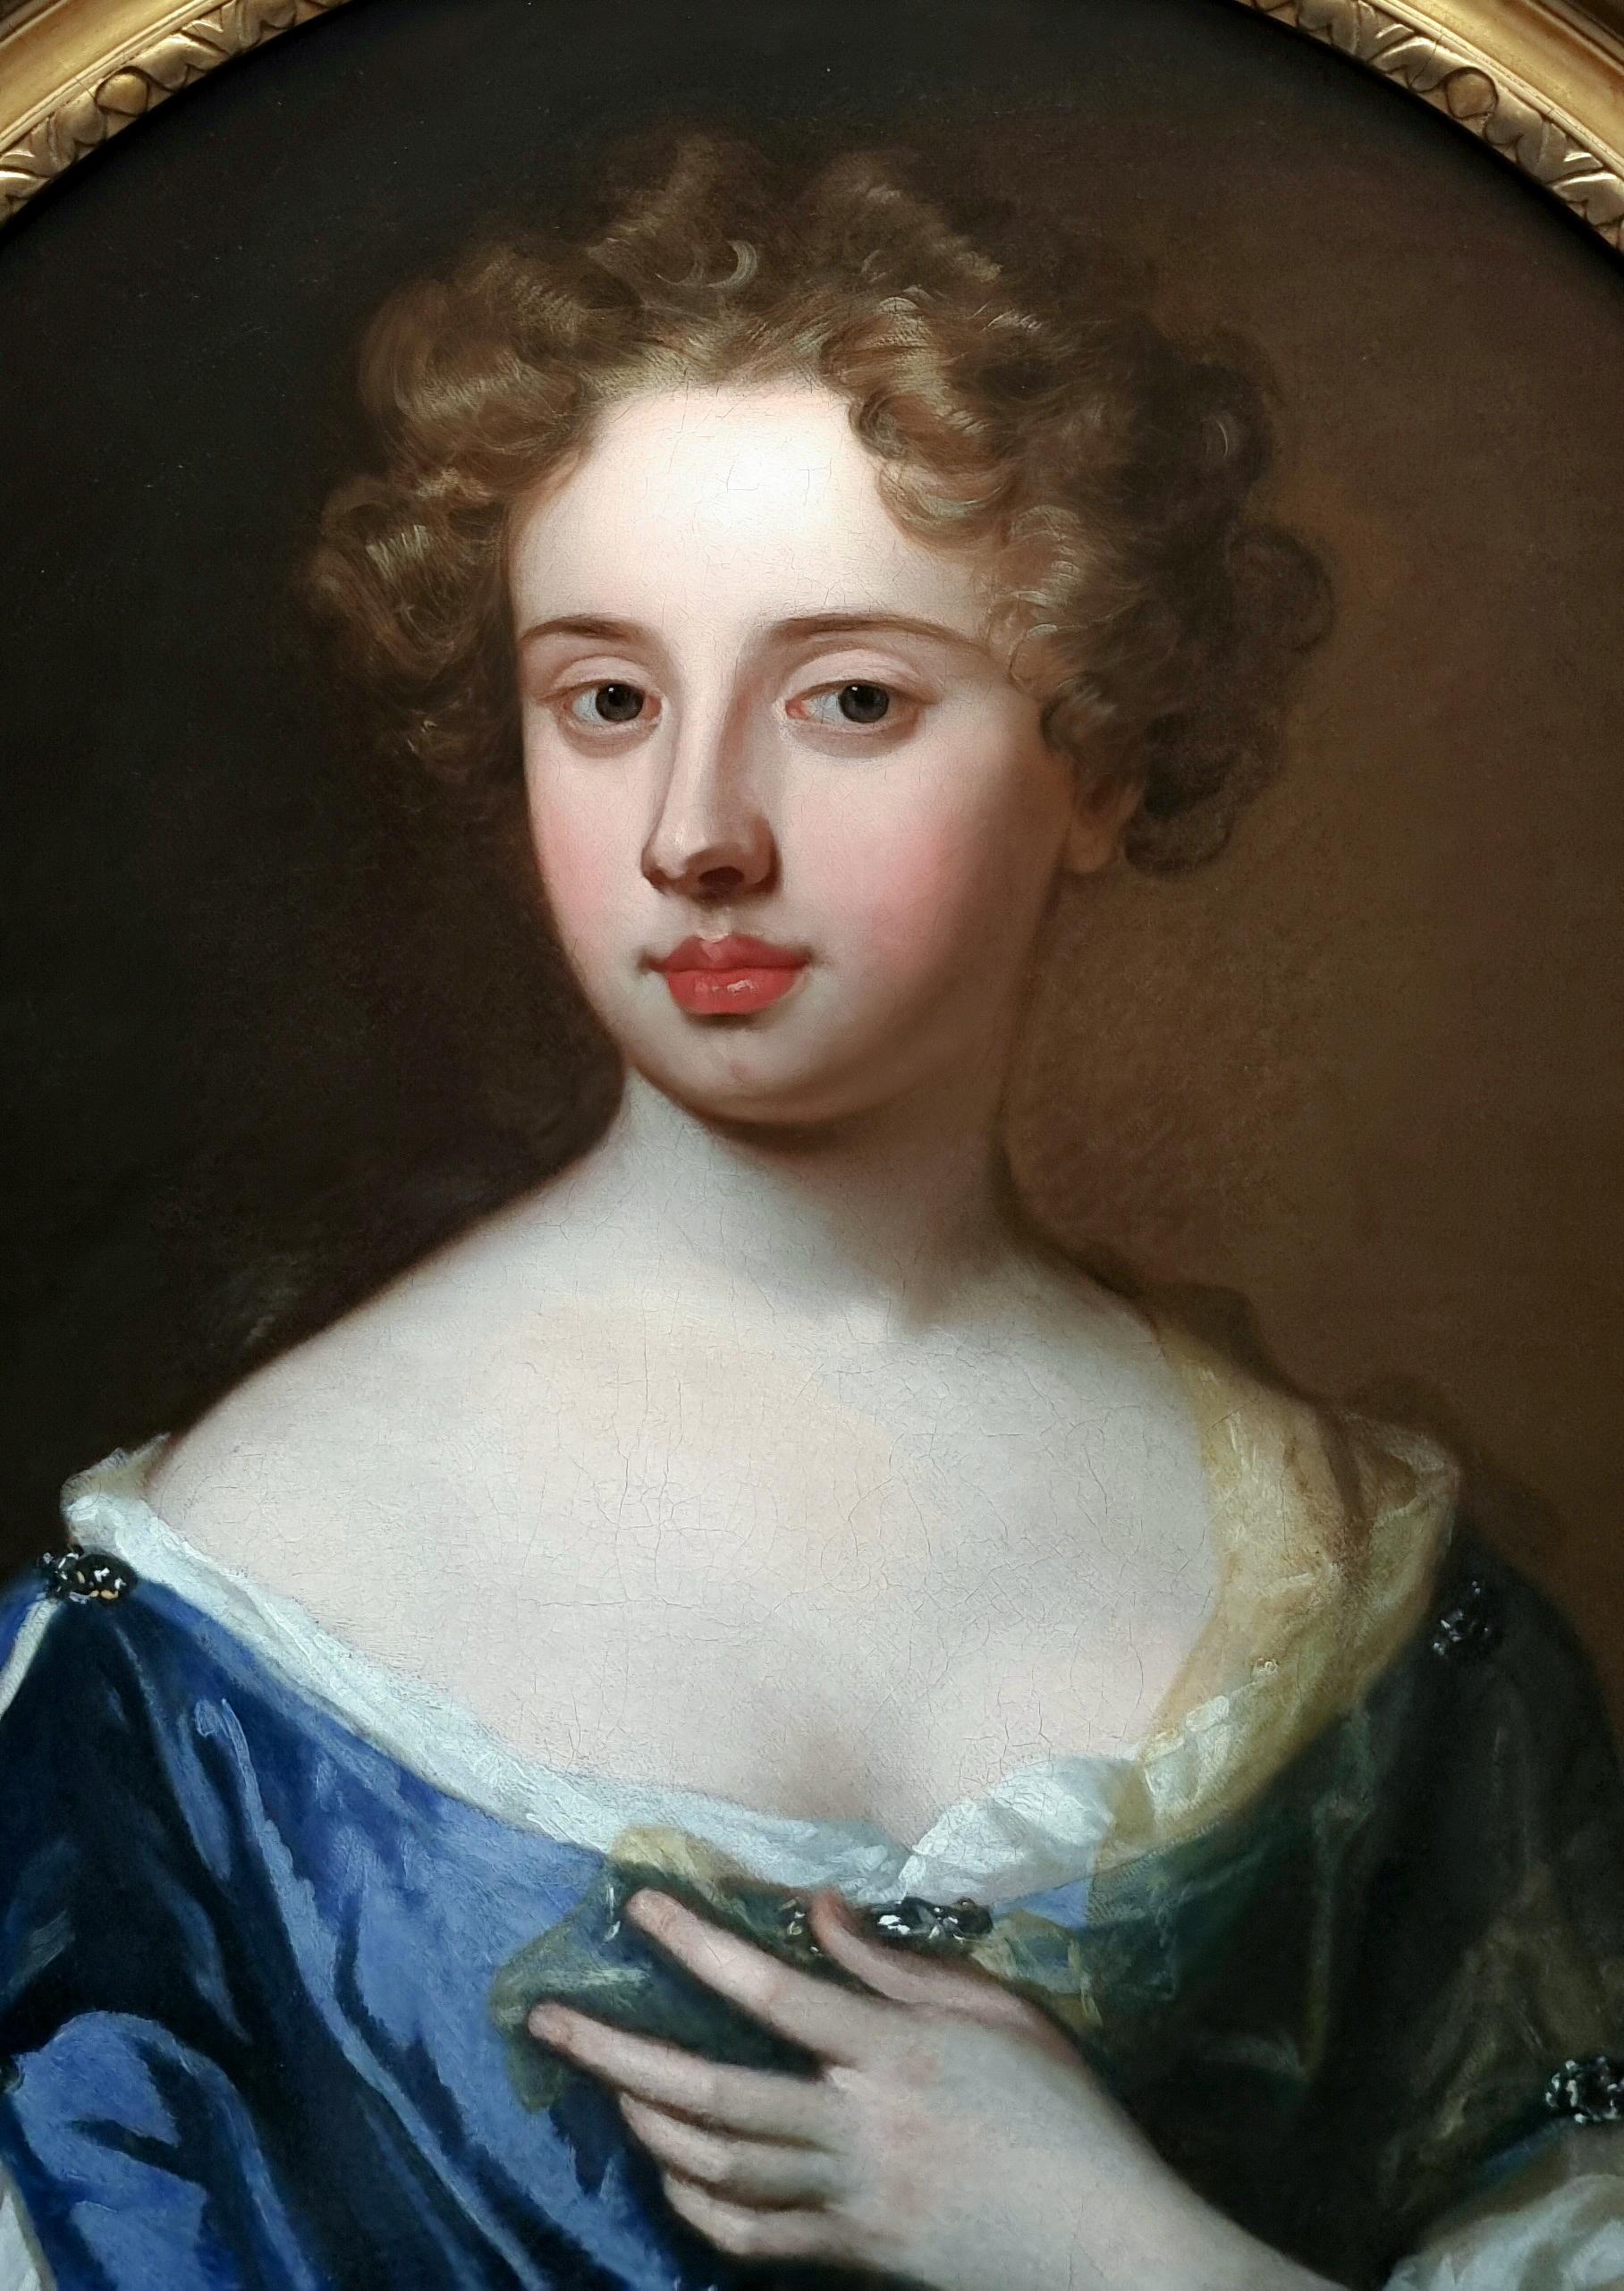 Portrait of a Lady in a Blue Gown Holding a Sheer Scarf c.1675-85
Studio of Sir Godfrey Kneller (1646-1723)

Titan Fine Art present this captivating portrait by the leading late seventeenth and early eighteenth-century court artist, Sir Godfrey